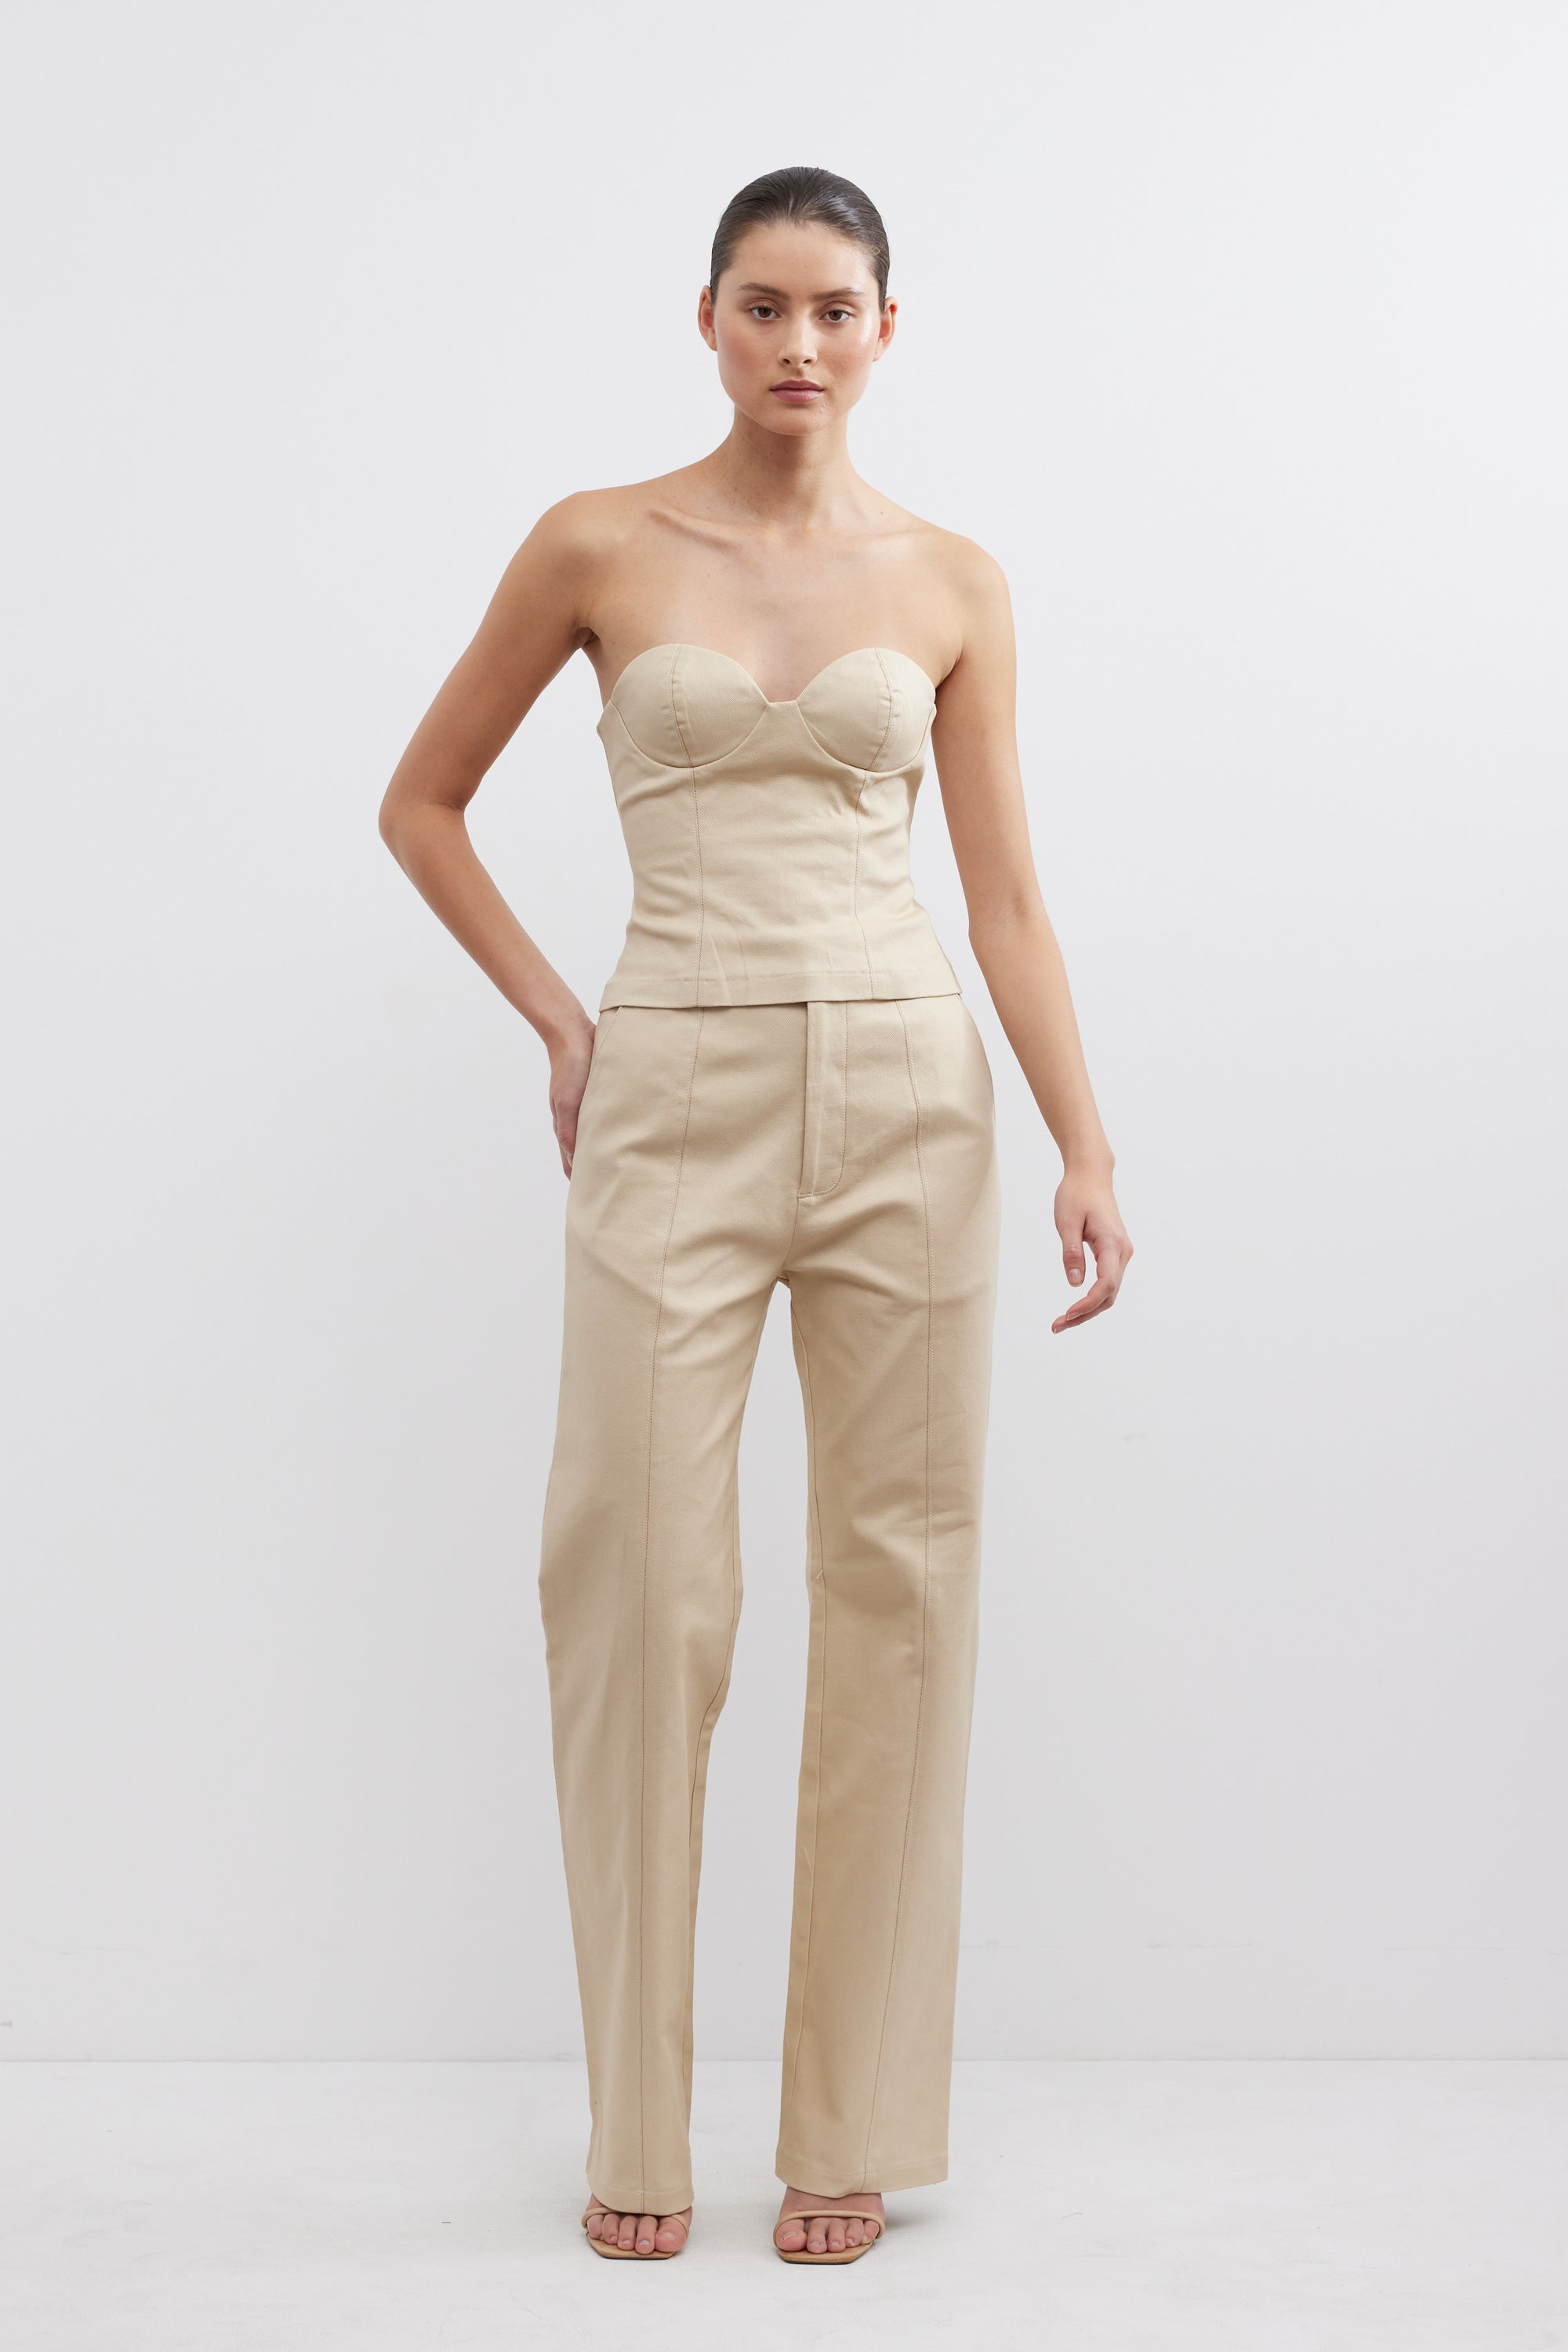 Aldo Bodice - TAKE 40% OFF DISCOUNT APPLIED AT CHECKOUT